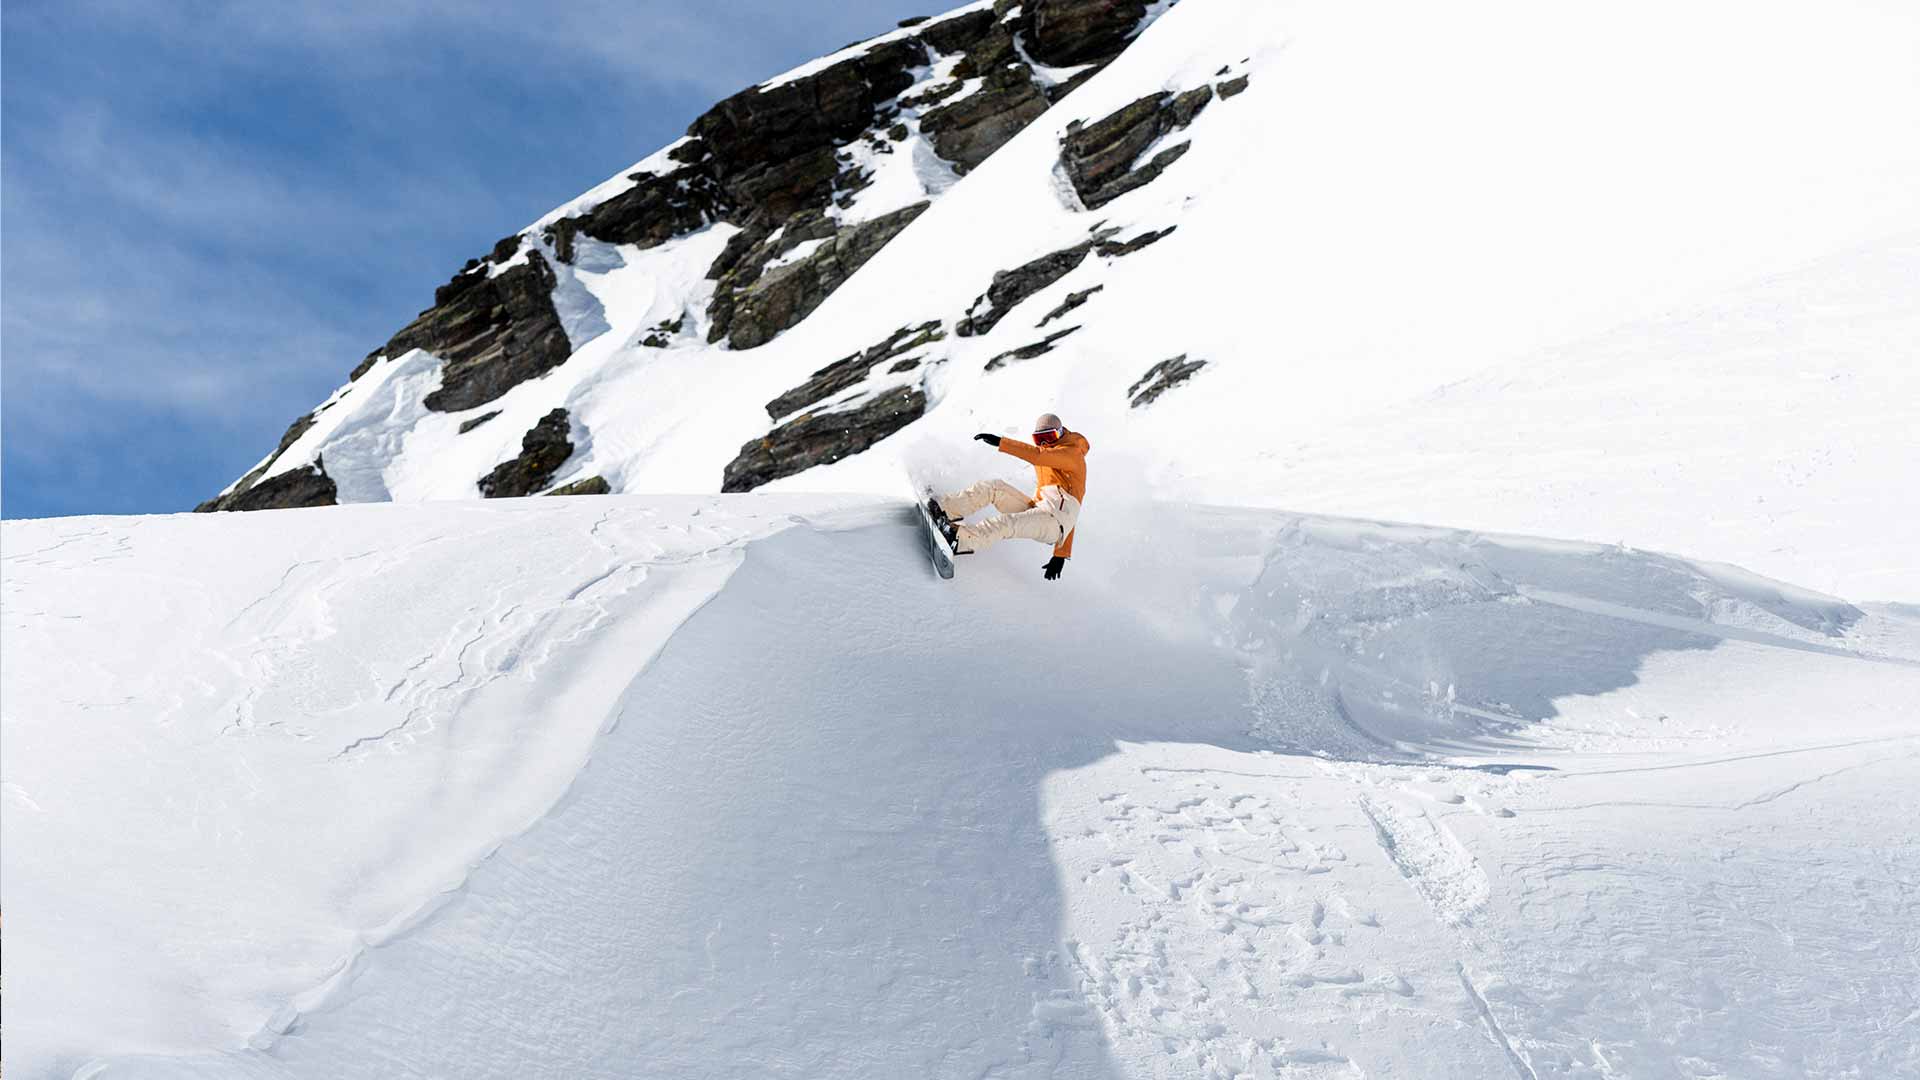 Rip Curl Snowboarder carving up a half pipe in France